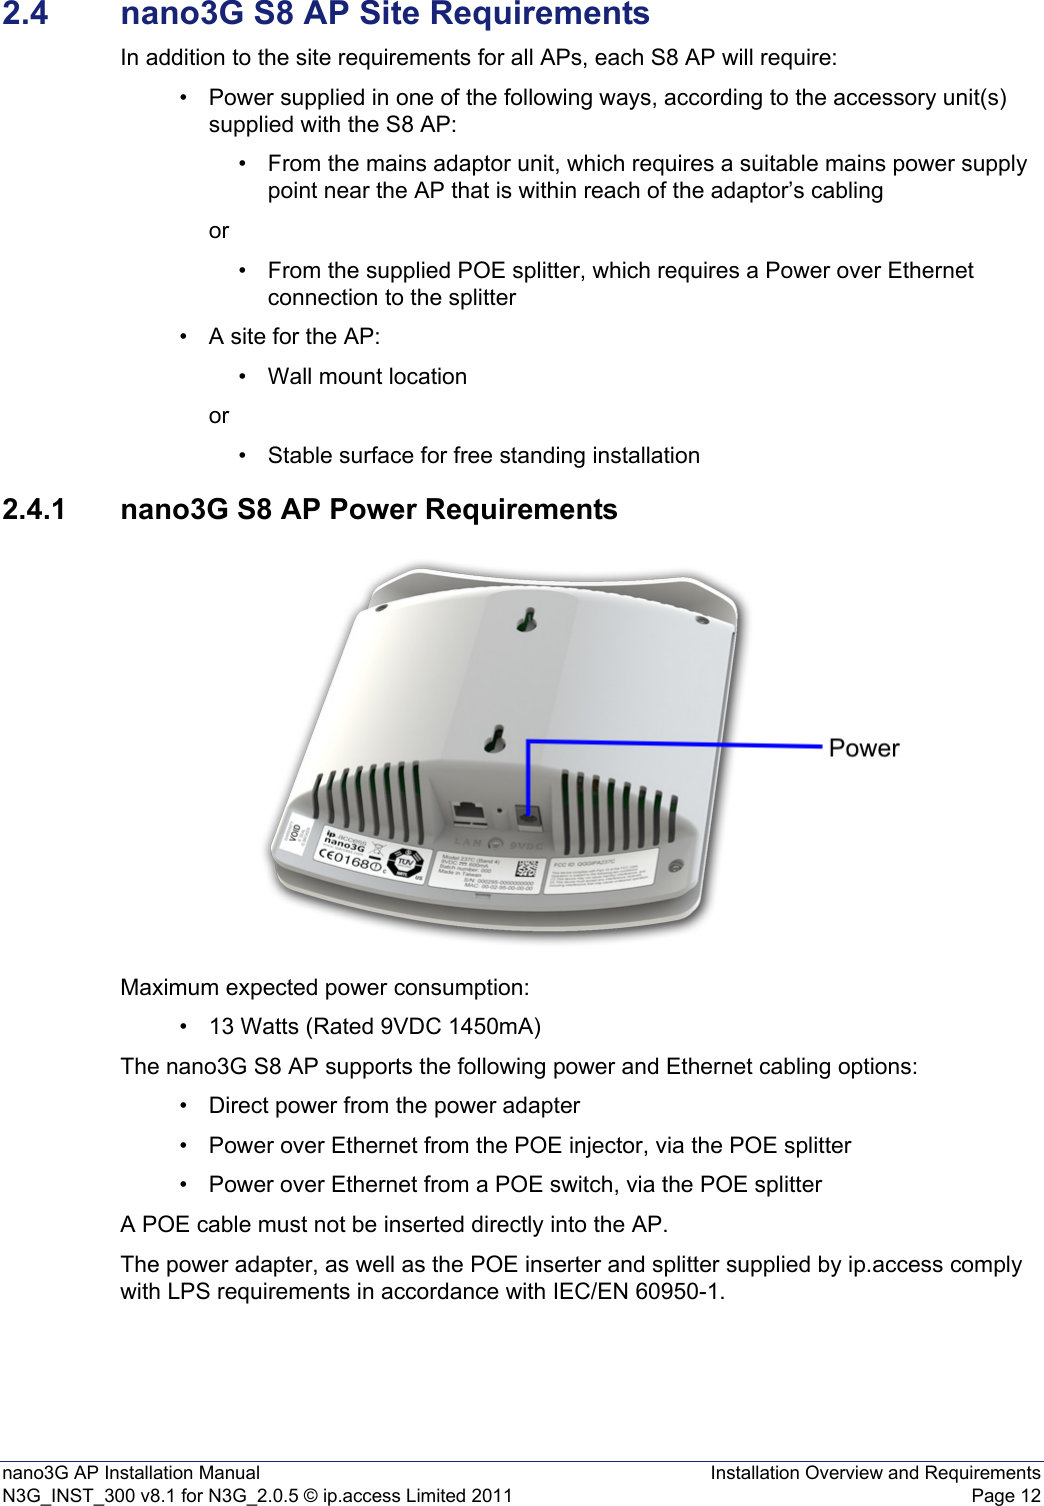 nano3G AP Installation Manual Installation Overview and RequirementsN3G_INST_300 v8.1 for N3G_2.0.5 © ip.access Limited 2011 Page 122.4 nano3G S8 AP Site RequirementsIn addition to the site requirements for all APs, each S8 AP will require:• Power supplied in one of the following ways, according to the accessory unit(s) supplied with the S8 AP:• From the mains adaptor unit, which requires a suitable mains power supply point near the AP that is within reach of the adaptor’s cablingor• From the supplied POE splitter, which requires a Power over Ethernet connection to the splitter • A site for the AP:• Wall mount locationor• Stable surface for free standing installation 2.4.1 nano3G S8 AP Power RequirementsMaximum expected power consumption:• 13 Watts (Rated 9VDC 1450mA)The nano3G S8 AP supports the following power and Ethernet cabling options:• Direct power from the power adapter• Power over Ethernet from the POE injector, via the POE splitter• Power over Ethernet from a POE switch, via the POE splitterA POE cable must not be inserted directly into the AP.The power adapter, as well as the POE inserter and splitter supplied by ip.access comply with LPS requirements in accordance with IEC/EN 60950-1.